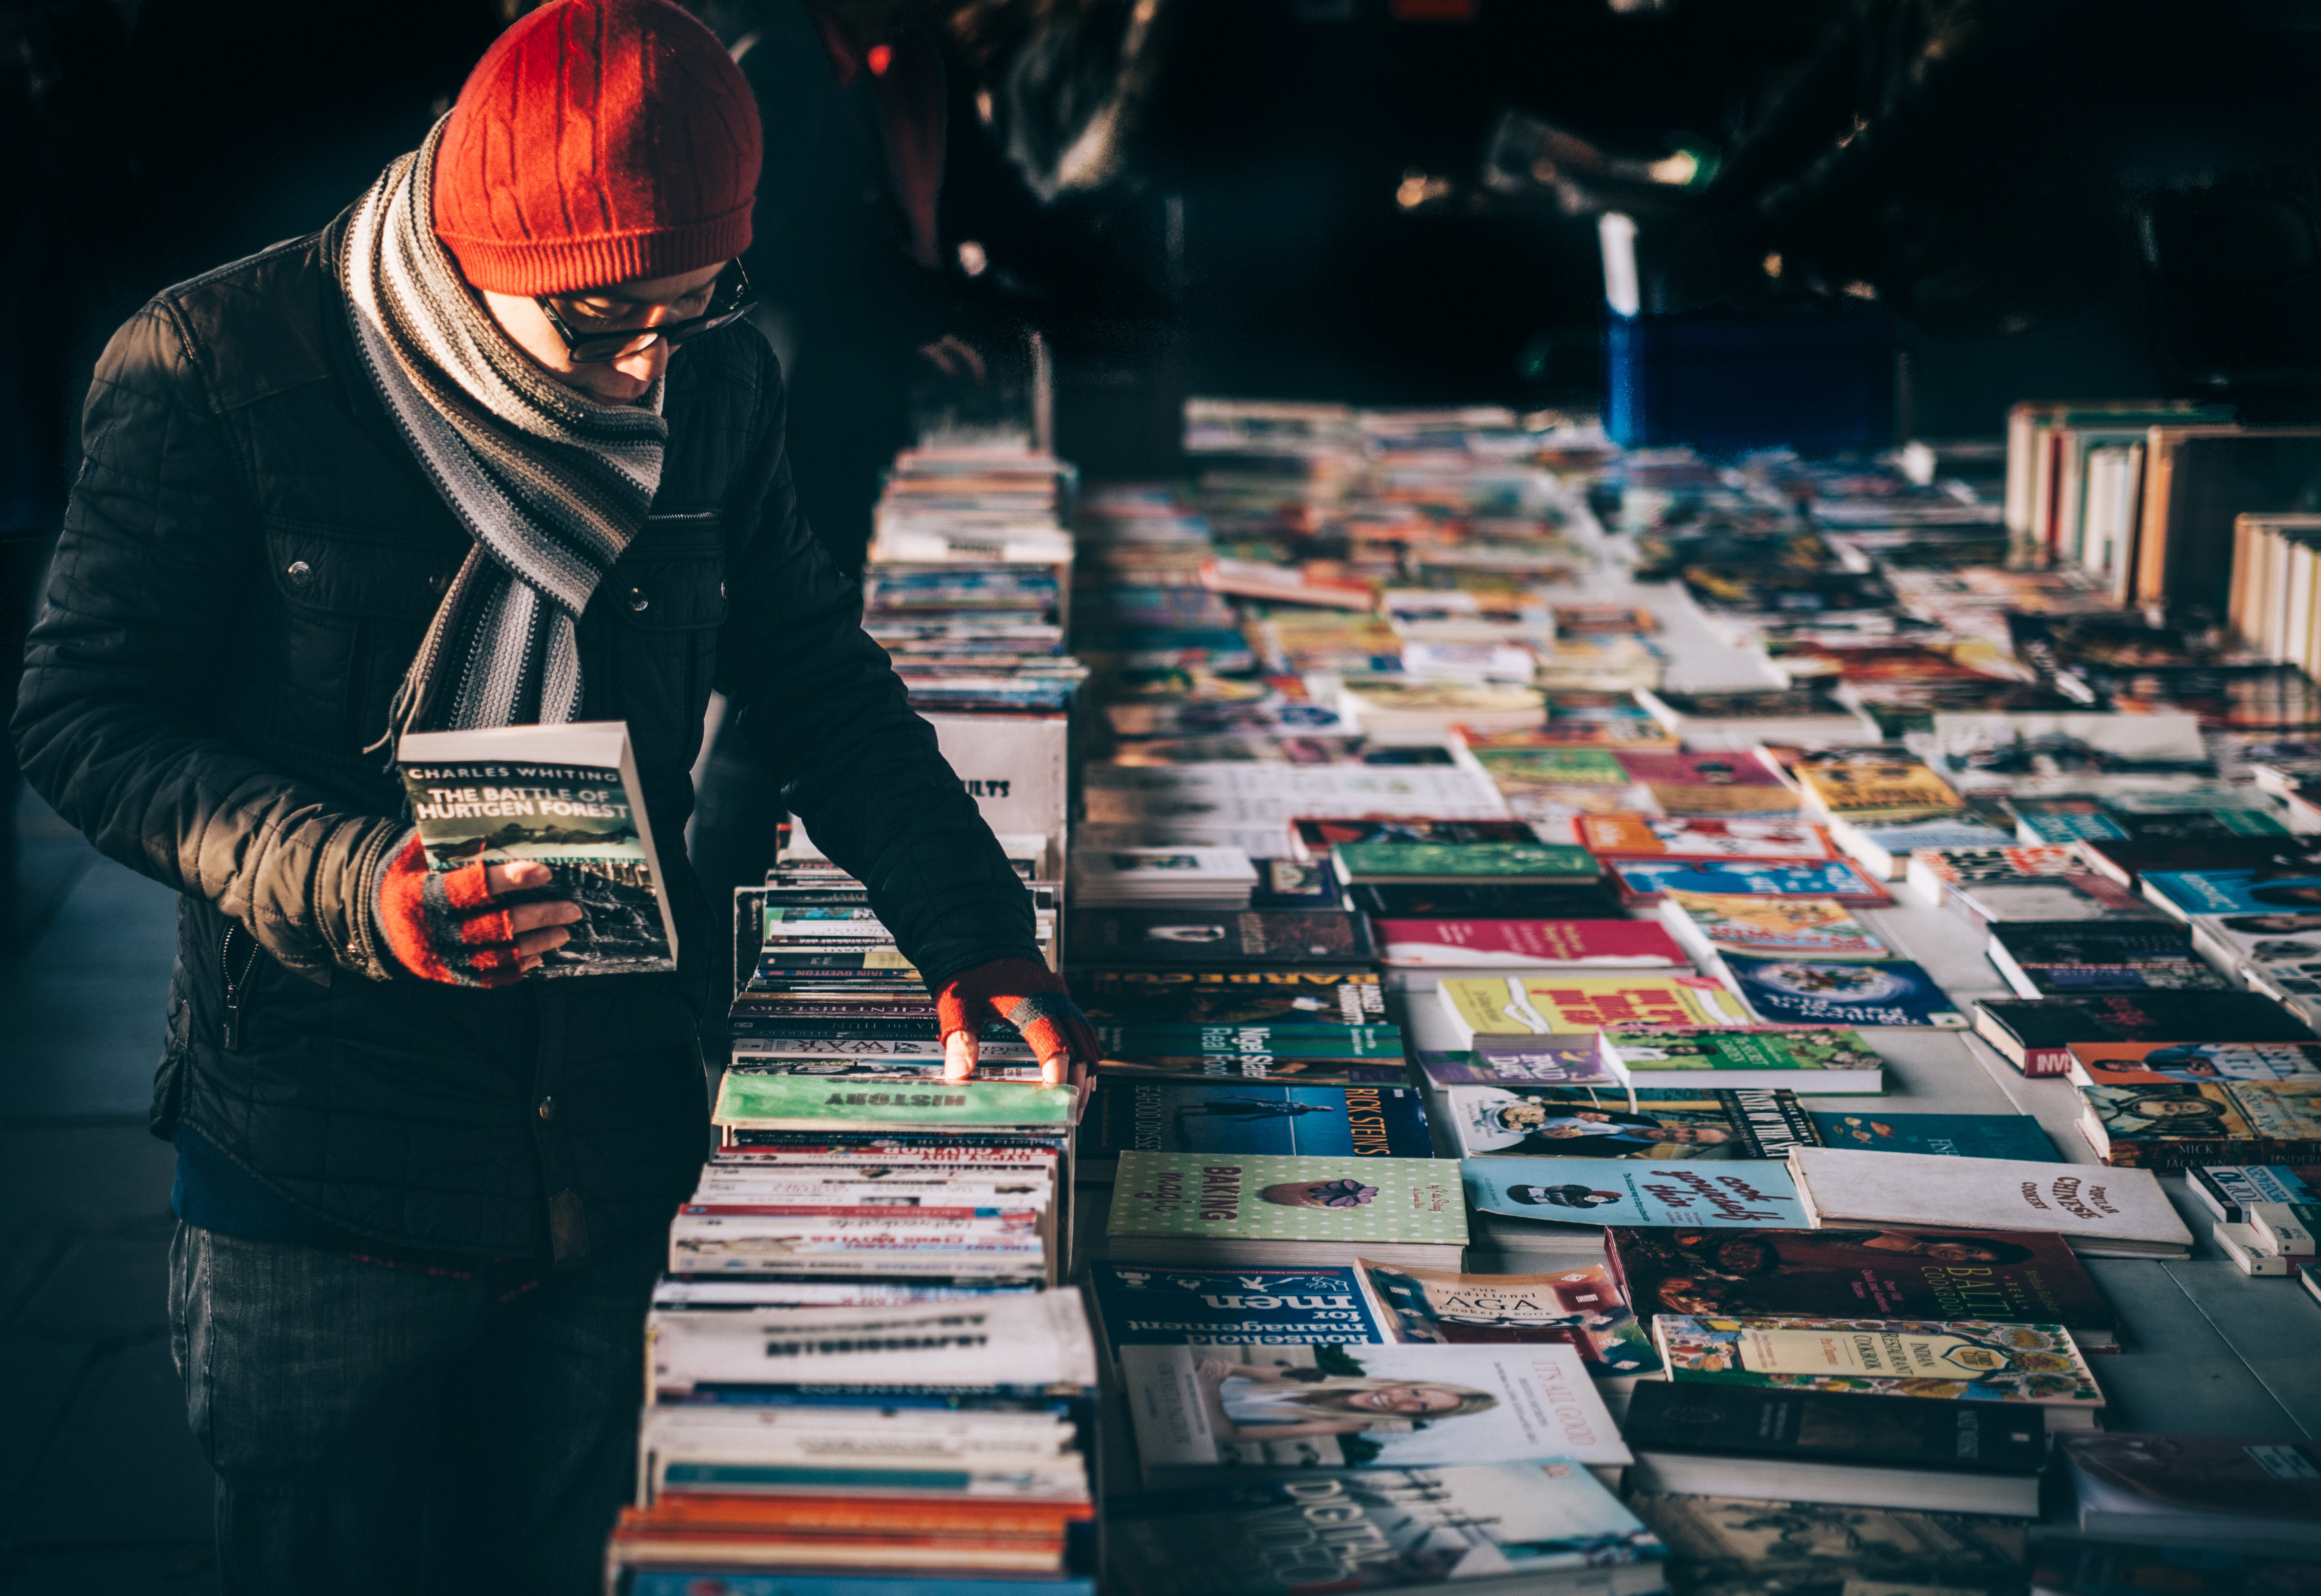 How to Effectively Promote Your Book in 2019: 5 Best Tactics